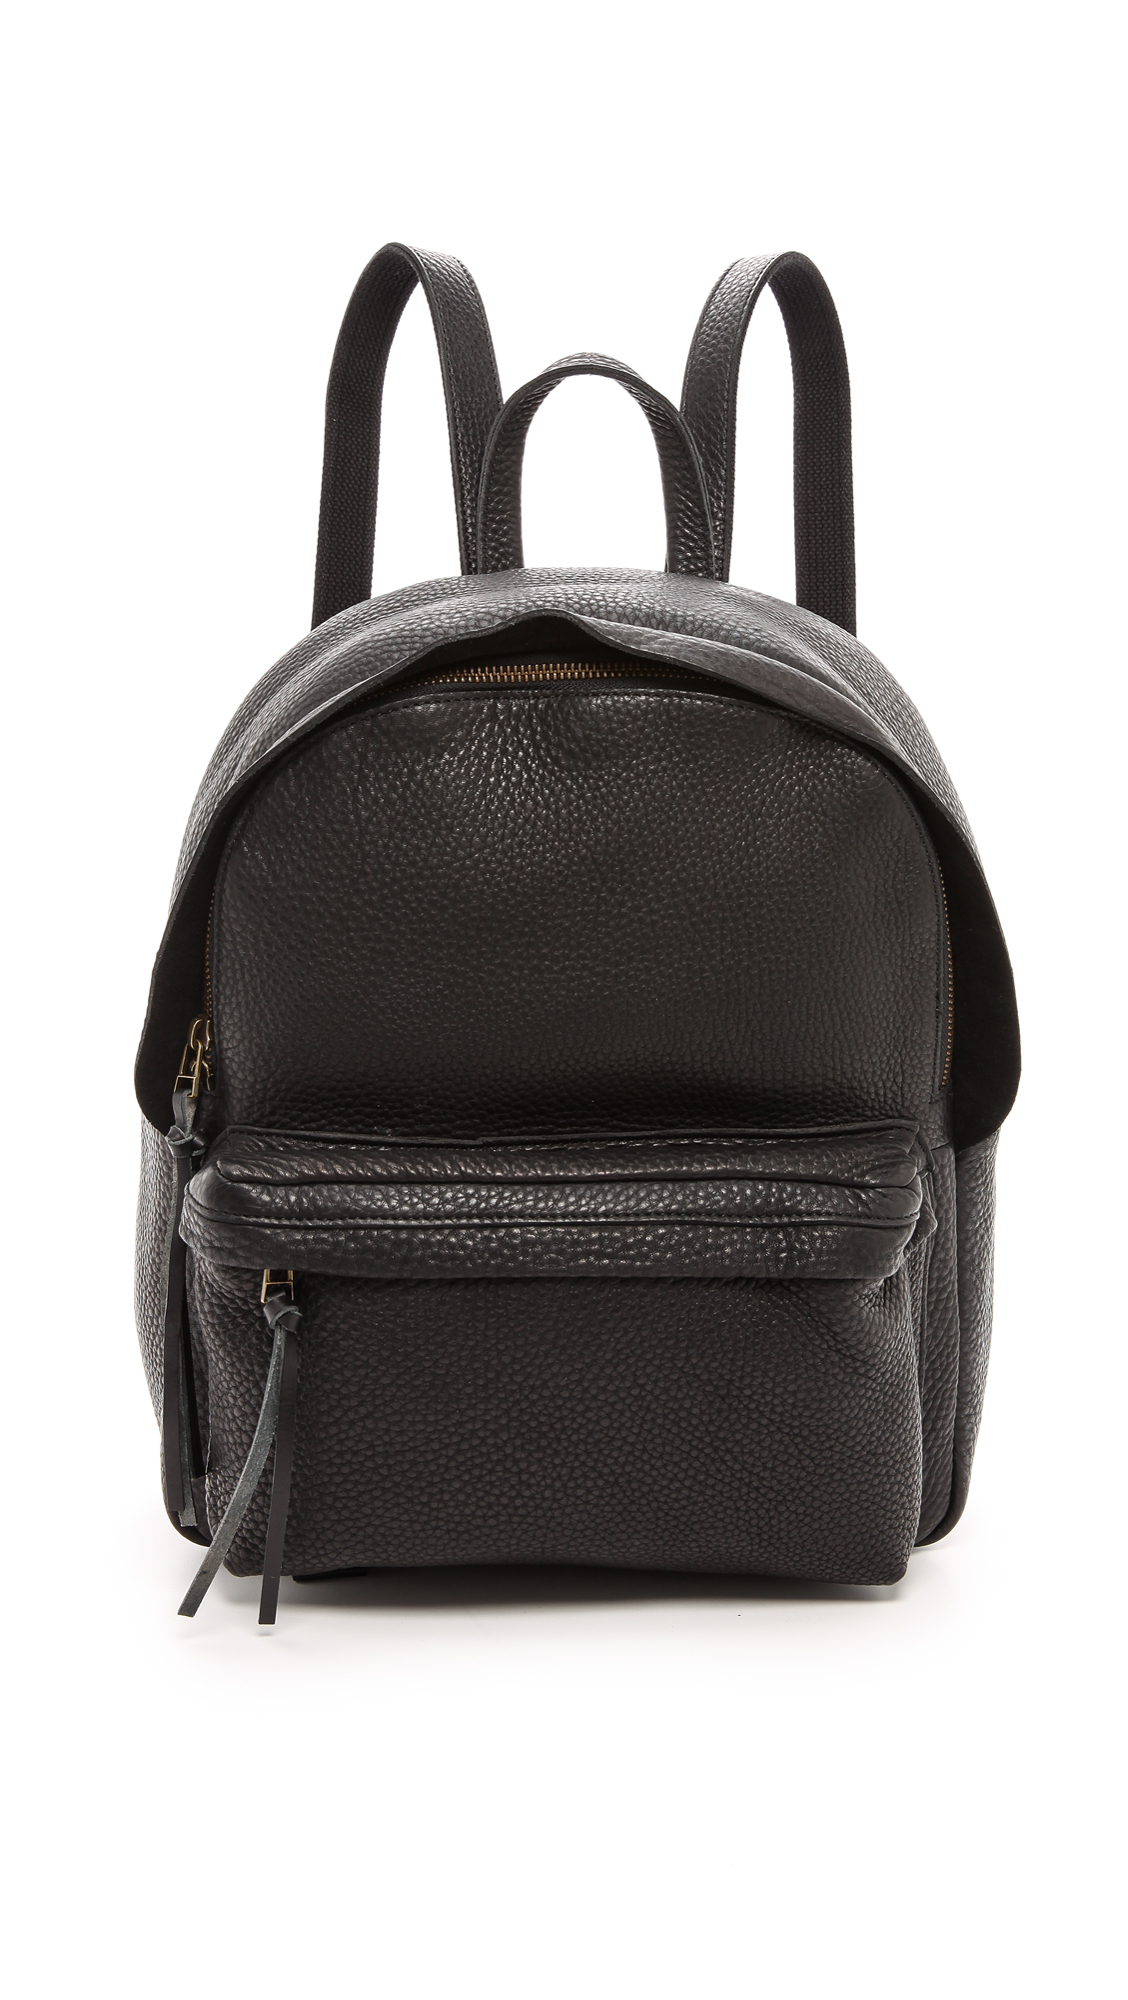 Madewell Grainy Leather Backpack - Pecan in Black | Lyst